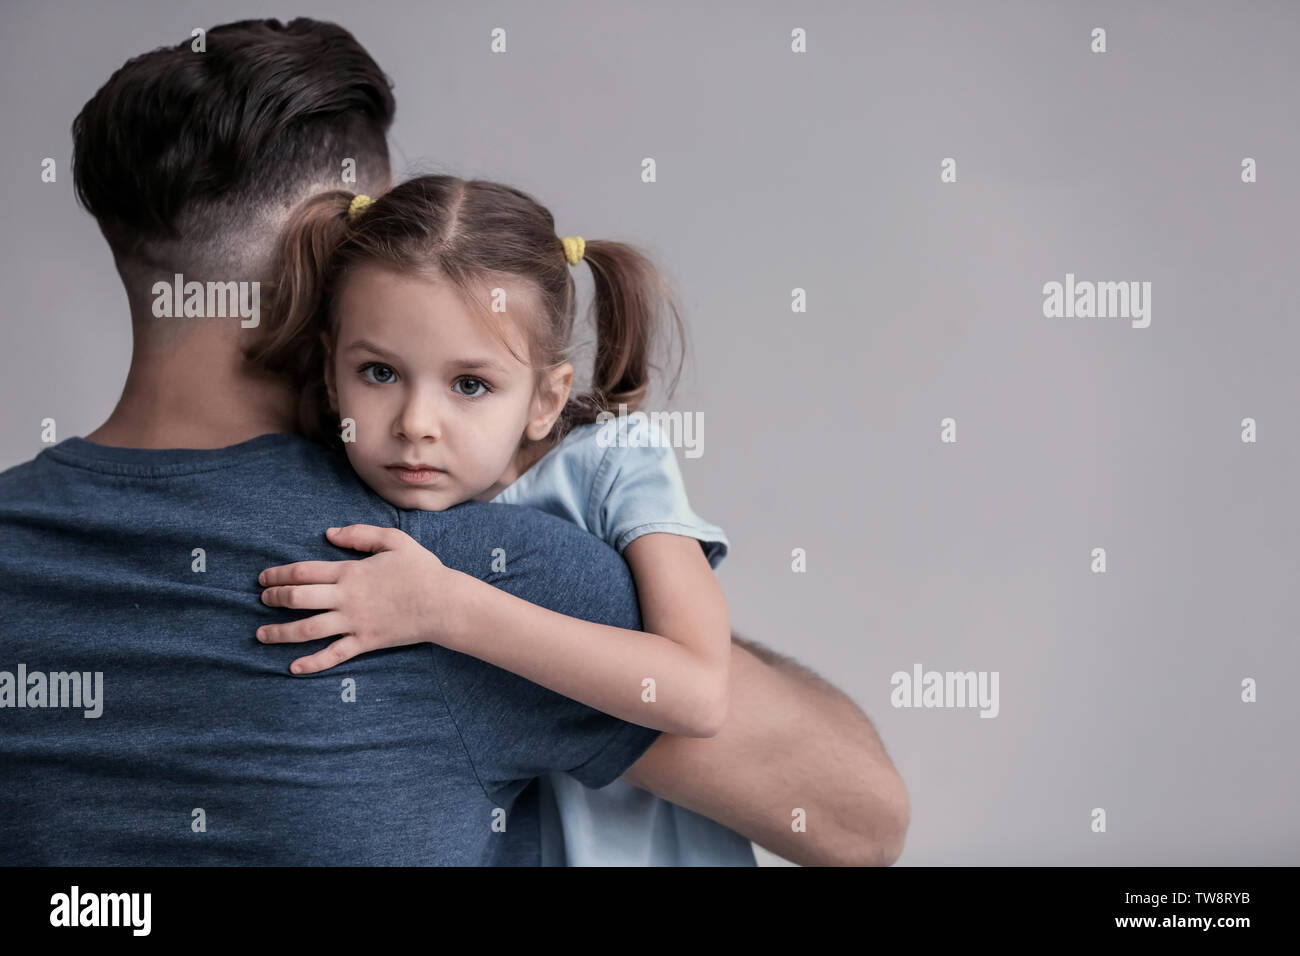 Sad little girl hugging her father on grey background Stock Photo